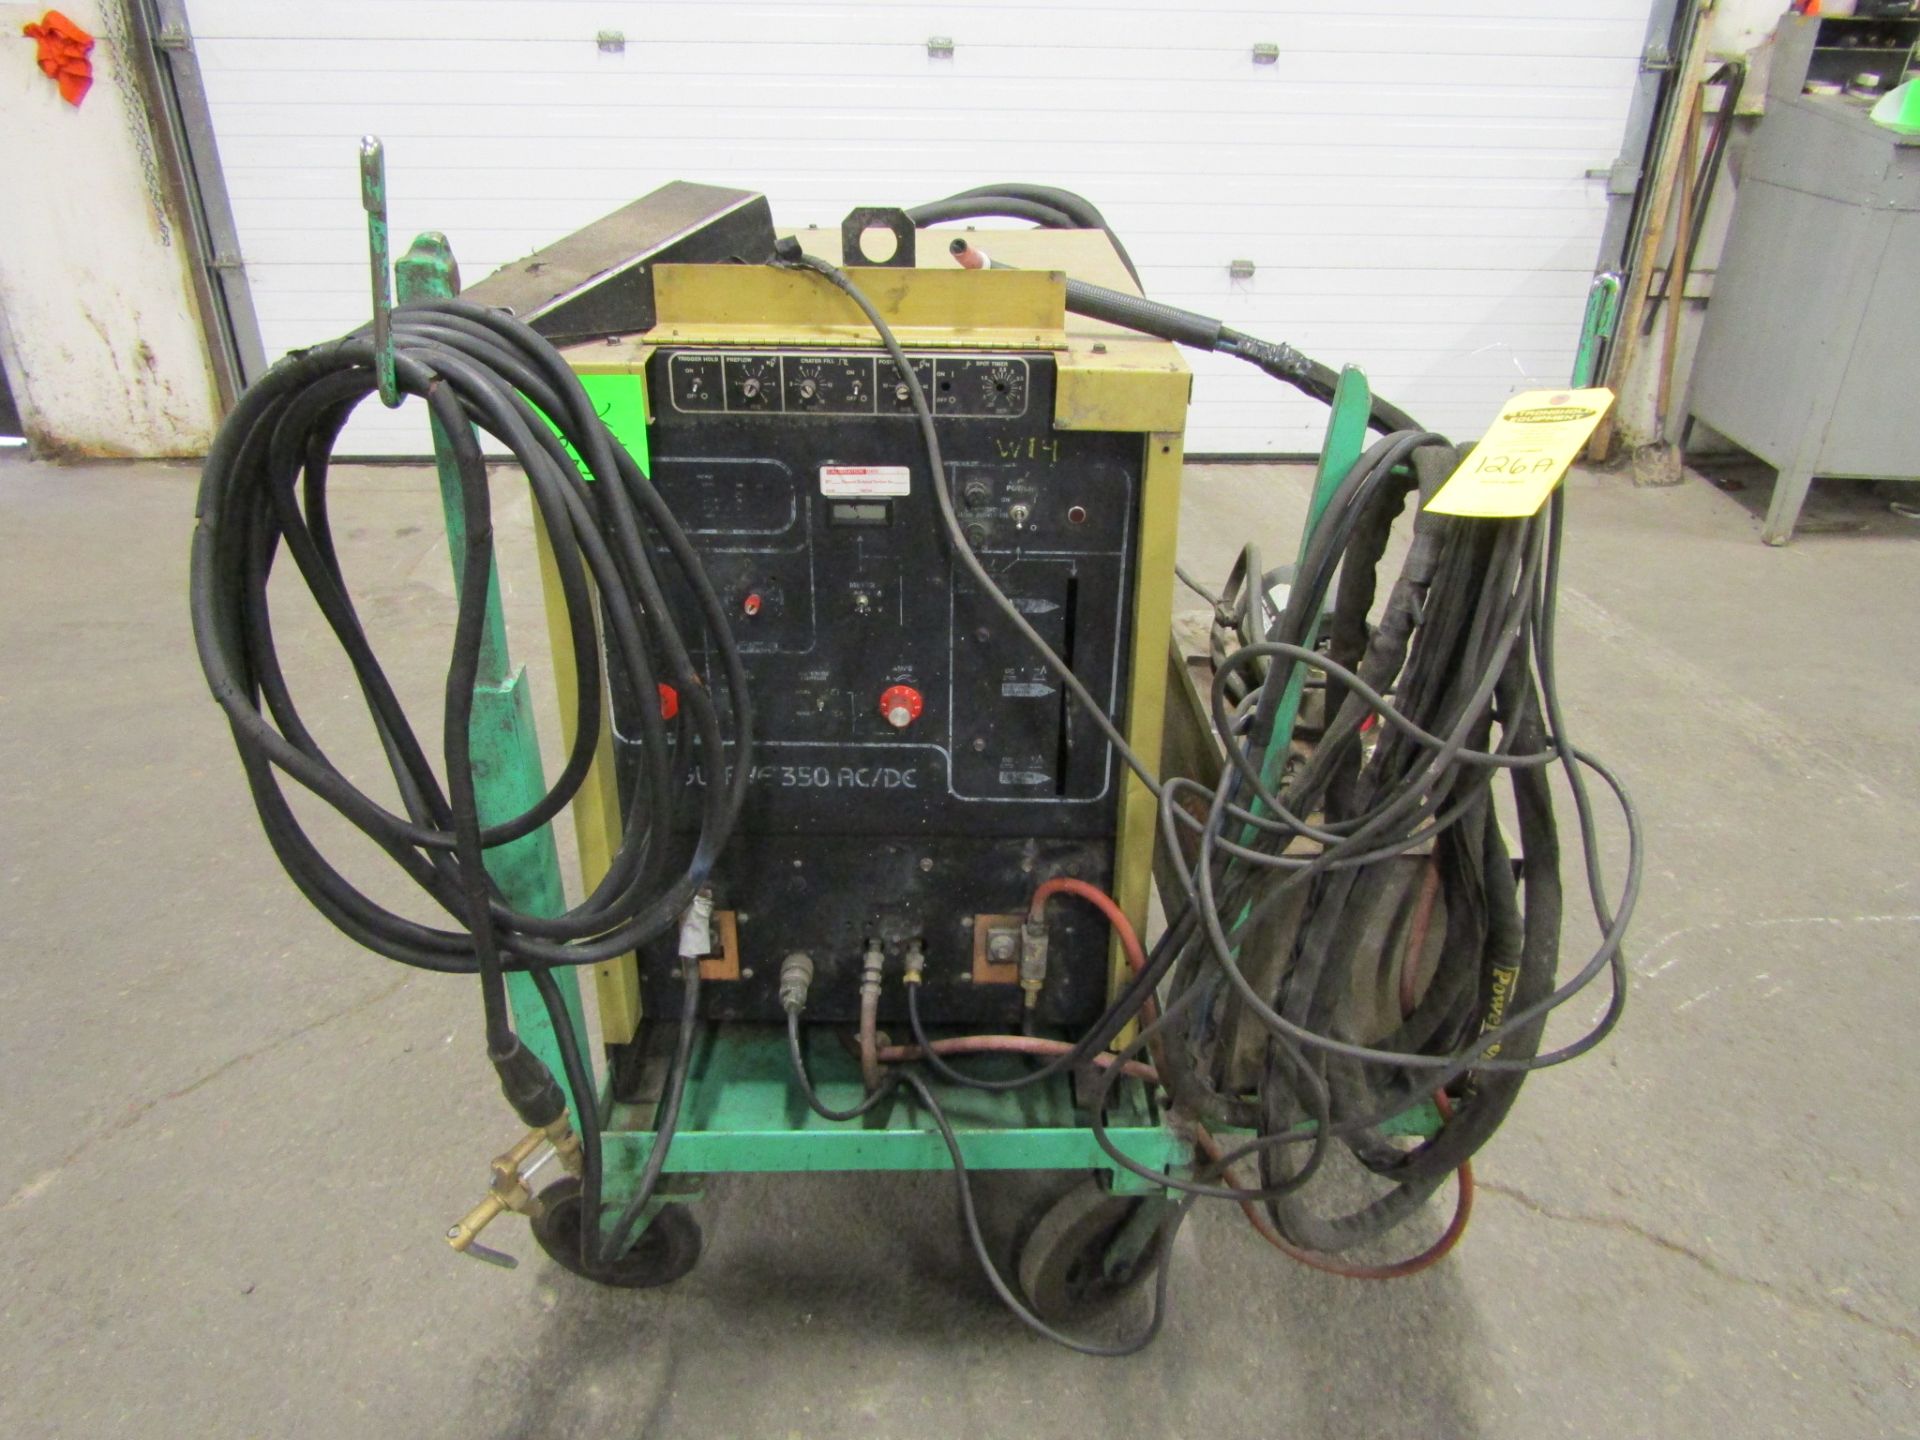 Hobart Tigwave 350 AC/DC Tig Welder 350 Amp with gun, cables and cart and water cooler